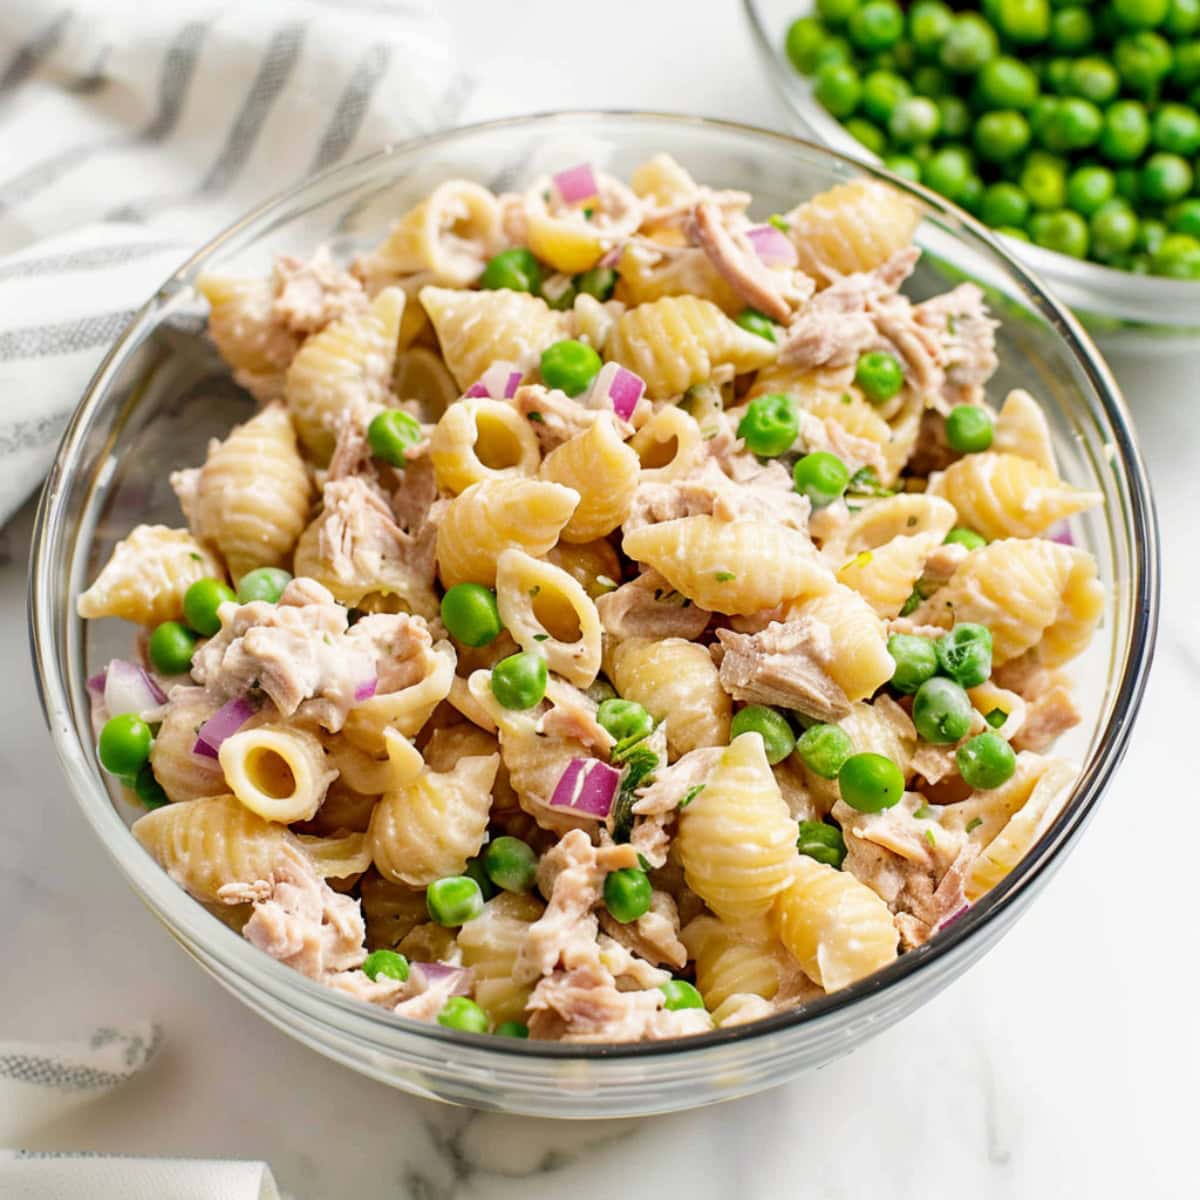 Creamy homemade tuna pasta salad in a glass bowl with green peas on the side.